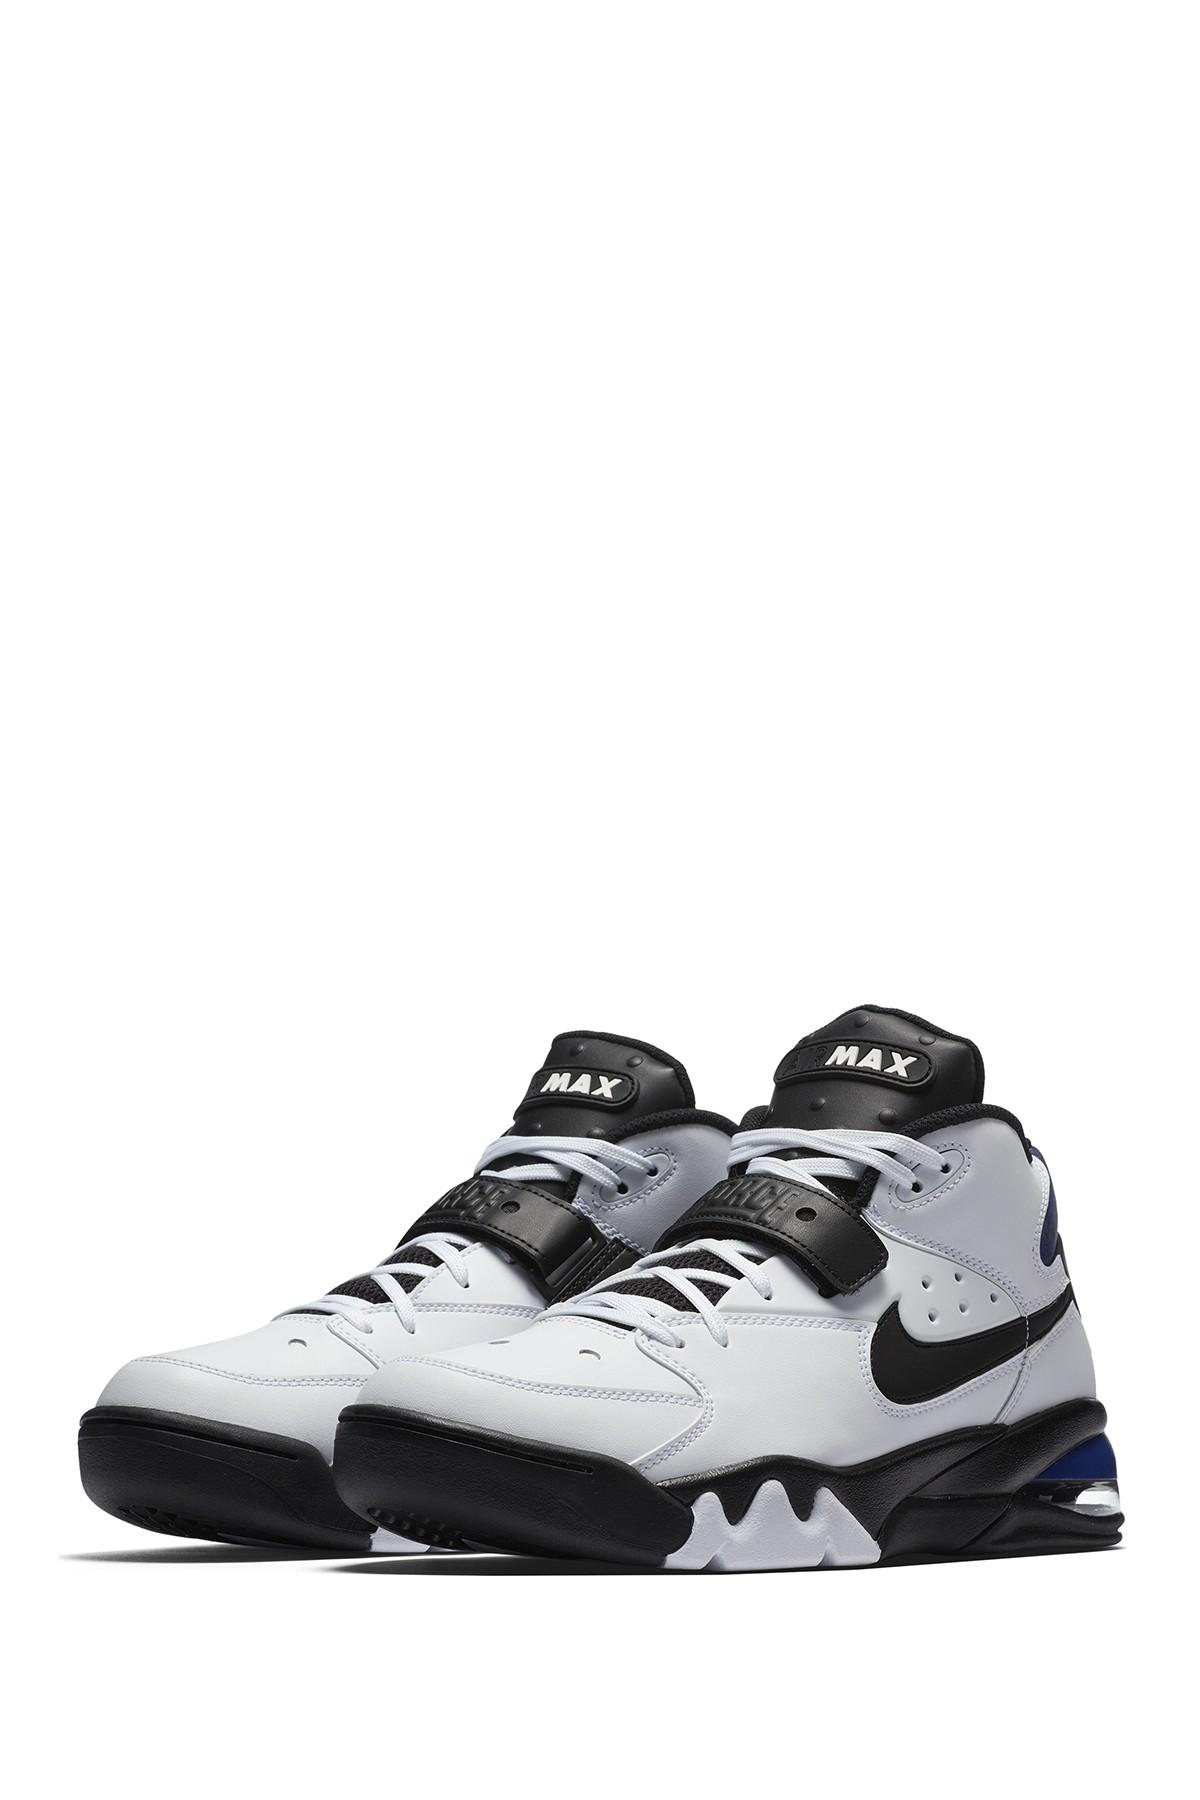 Nike Leather Air Force Max 93 Sneaker in Black for Men - Lyst